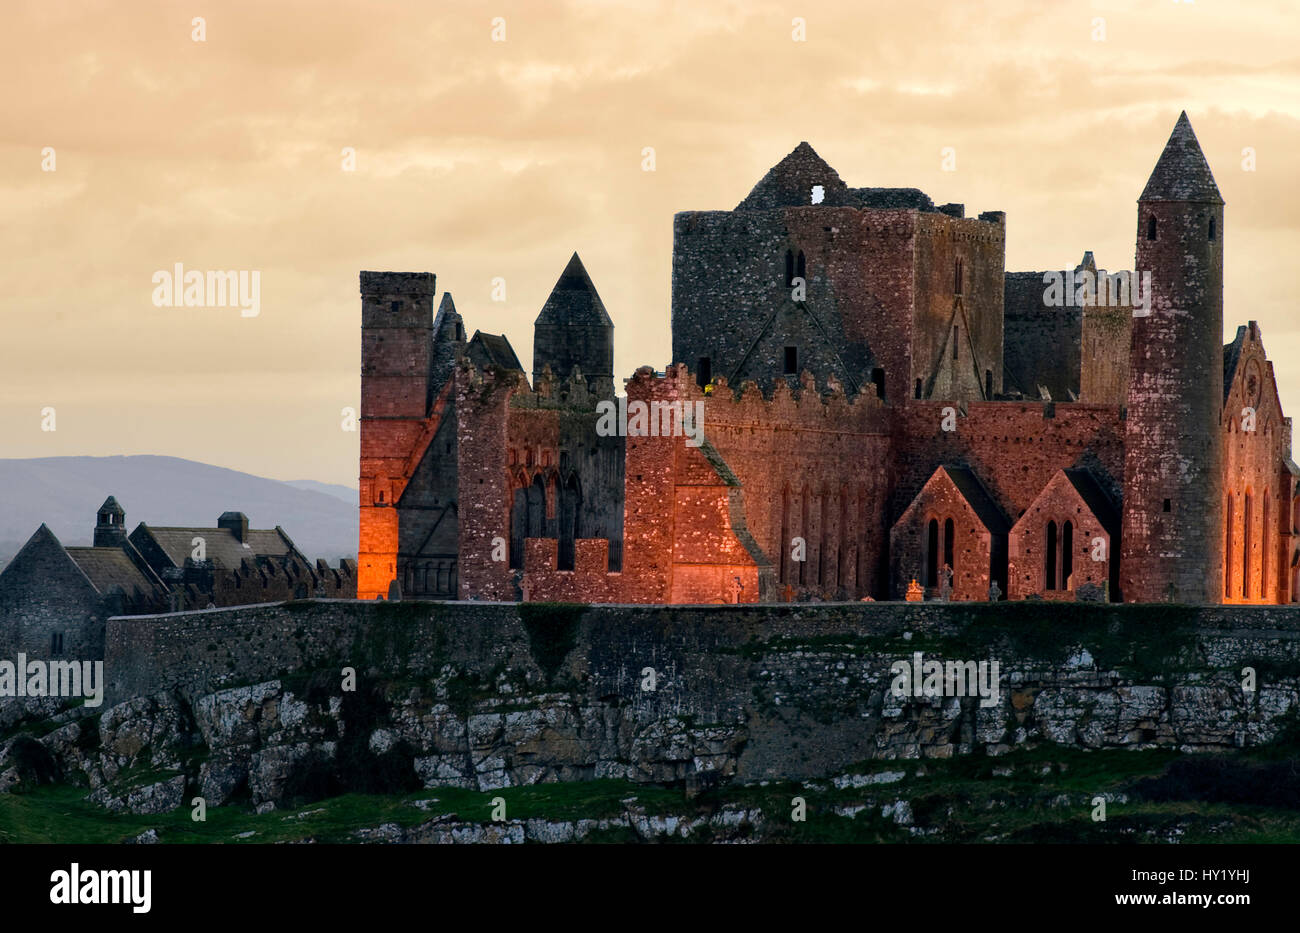 This stock photo shows the illuminated Irish castle Rock of Cashel. The image was taken on a sunny spring afternoon. Stock Photo